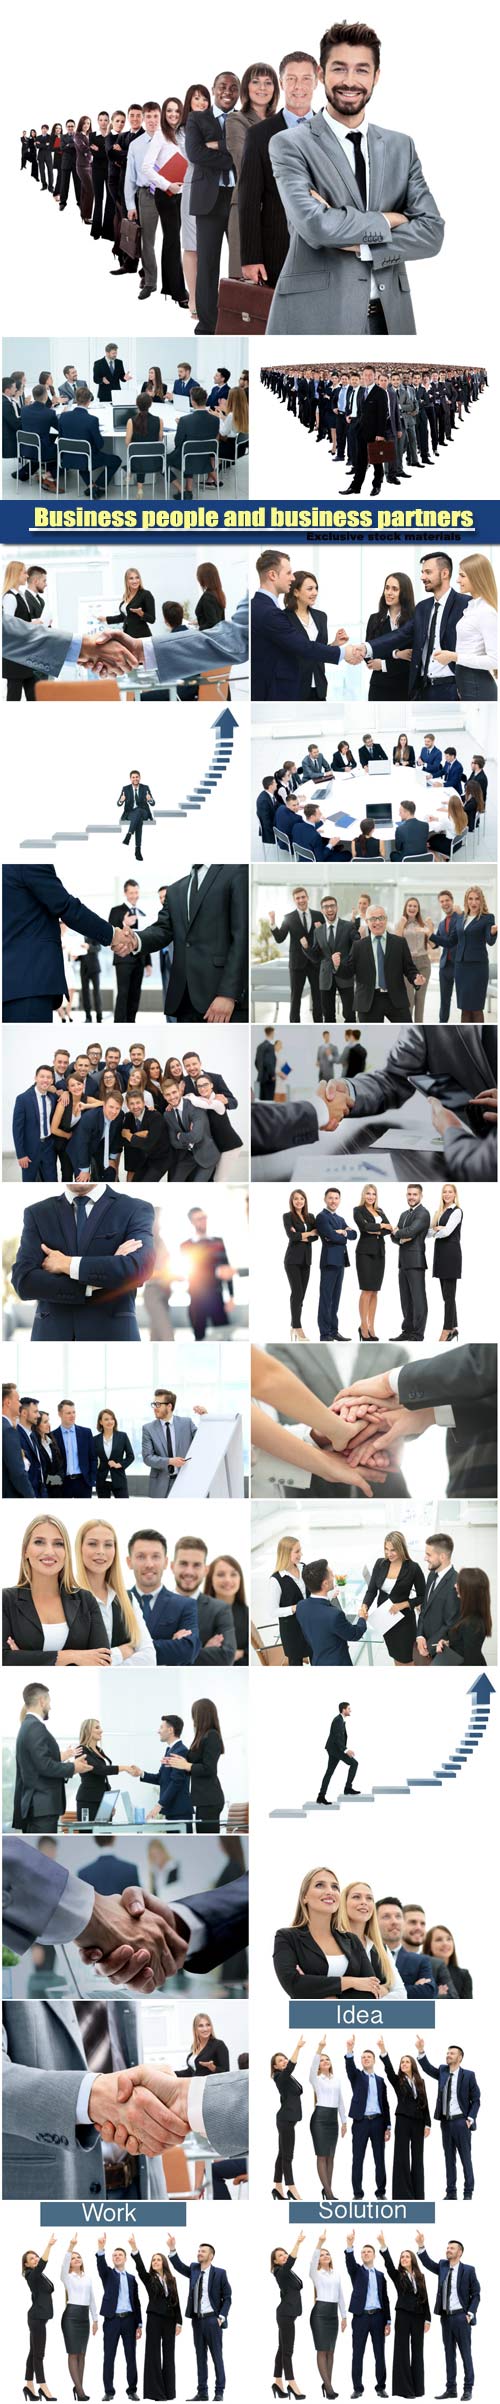 Business people and business partners greeting each other with handshake, conference